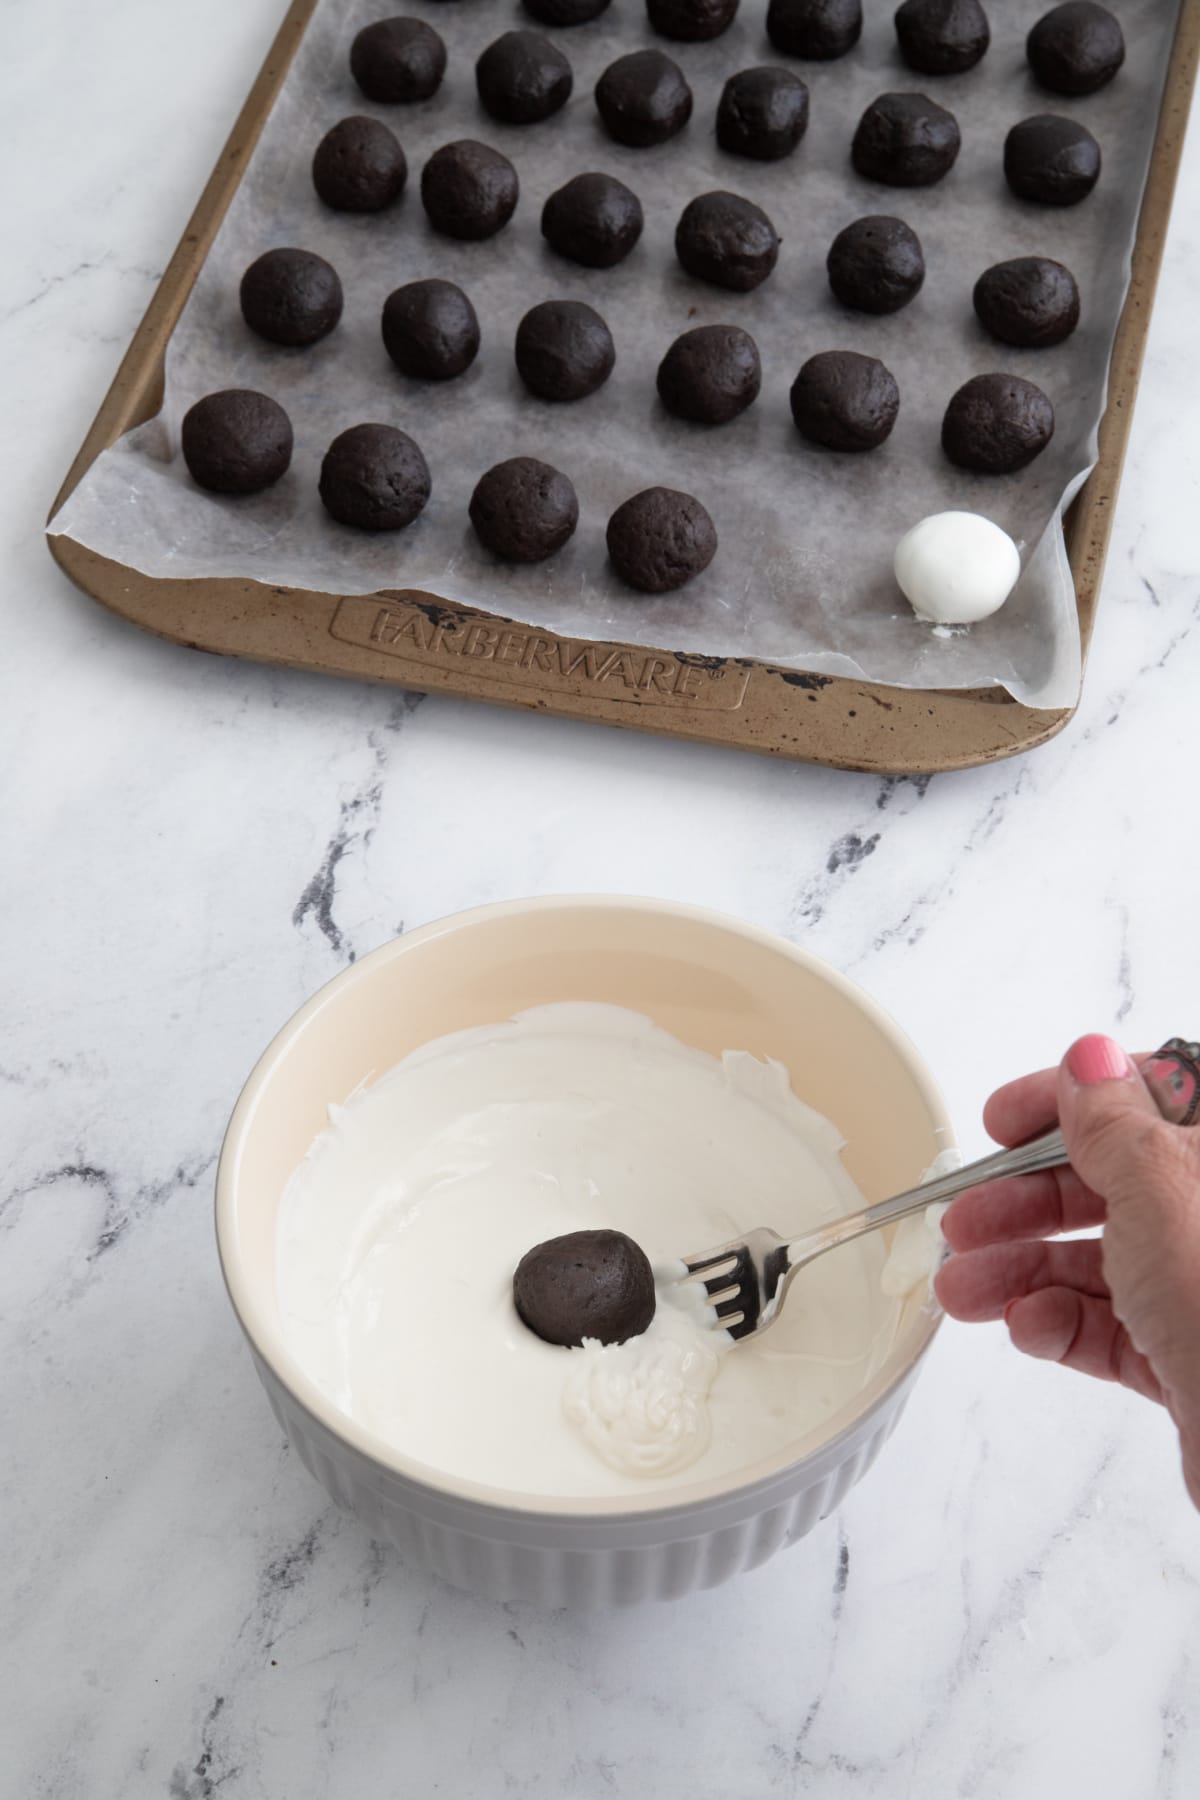 Oreo ball dipped in melted white chocolate